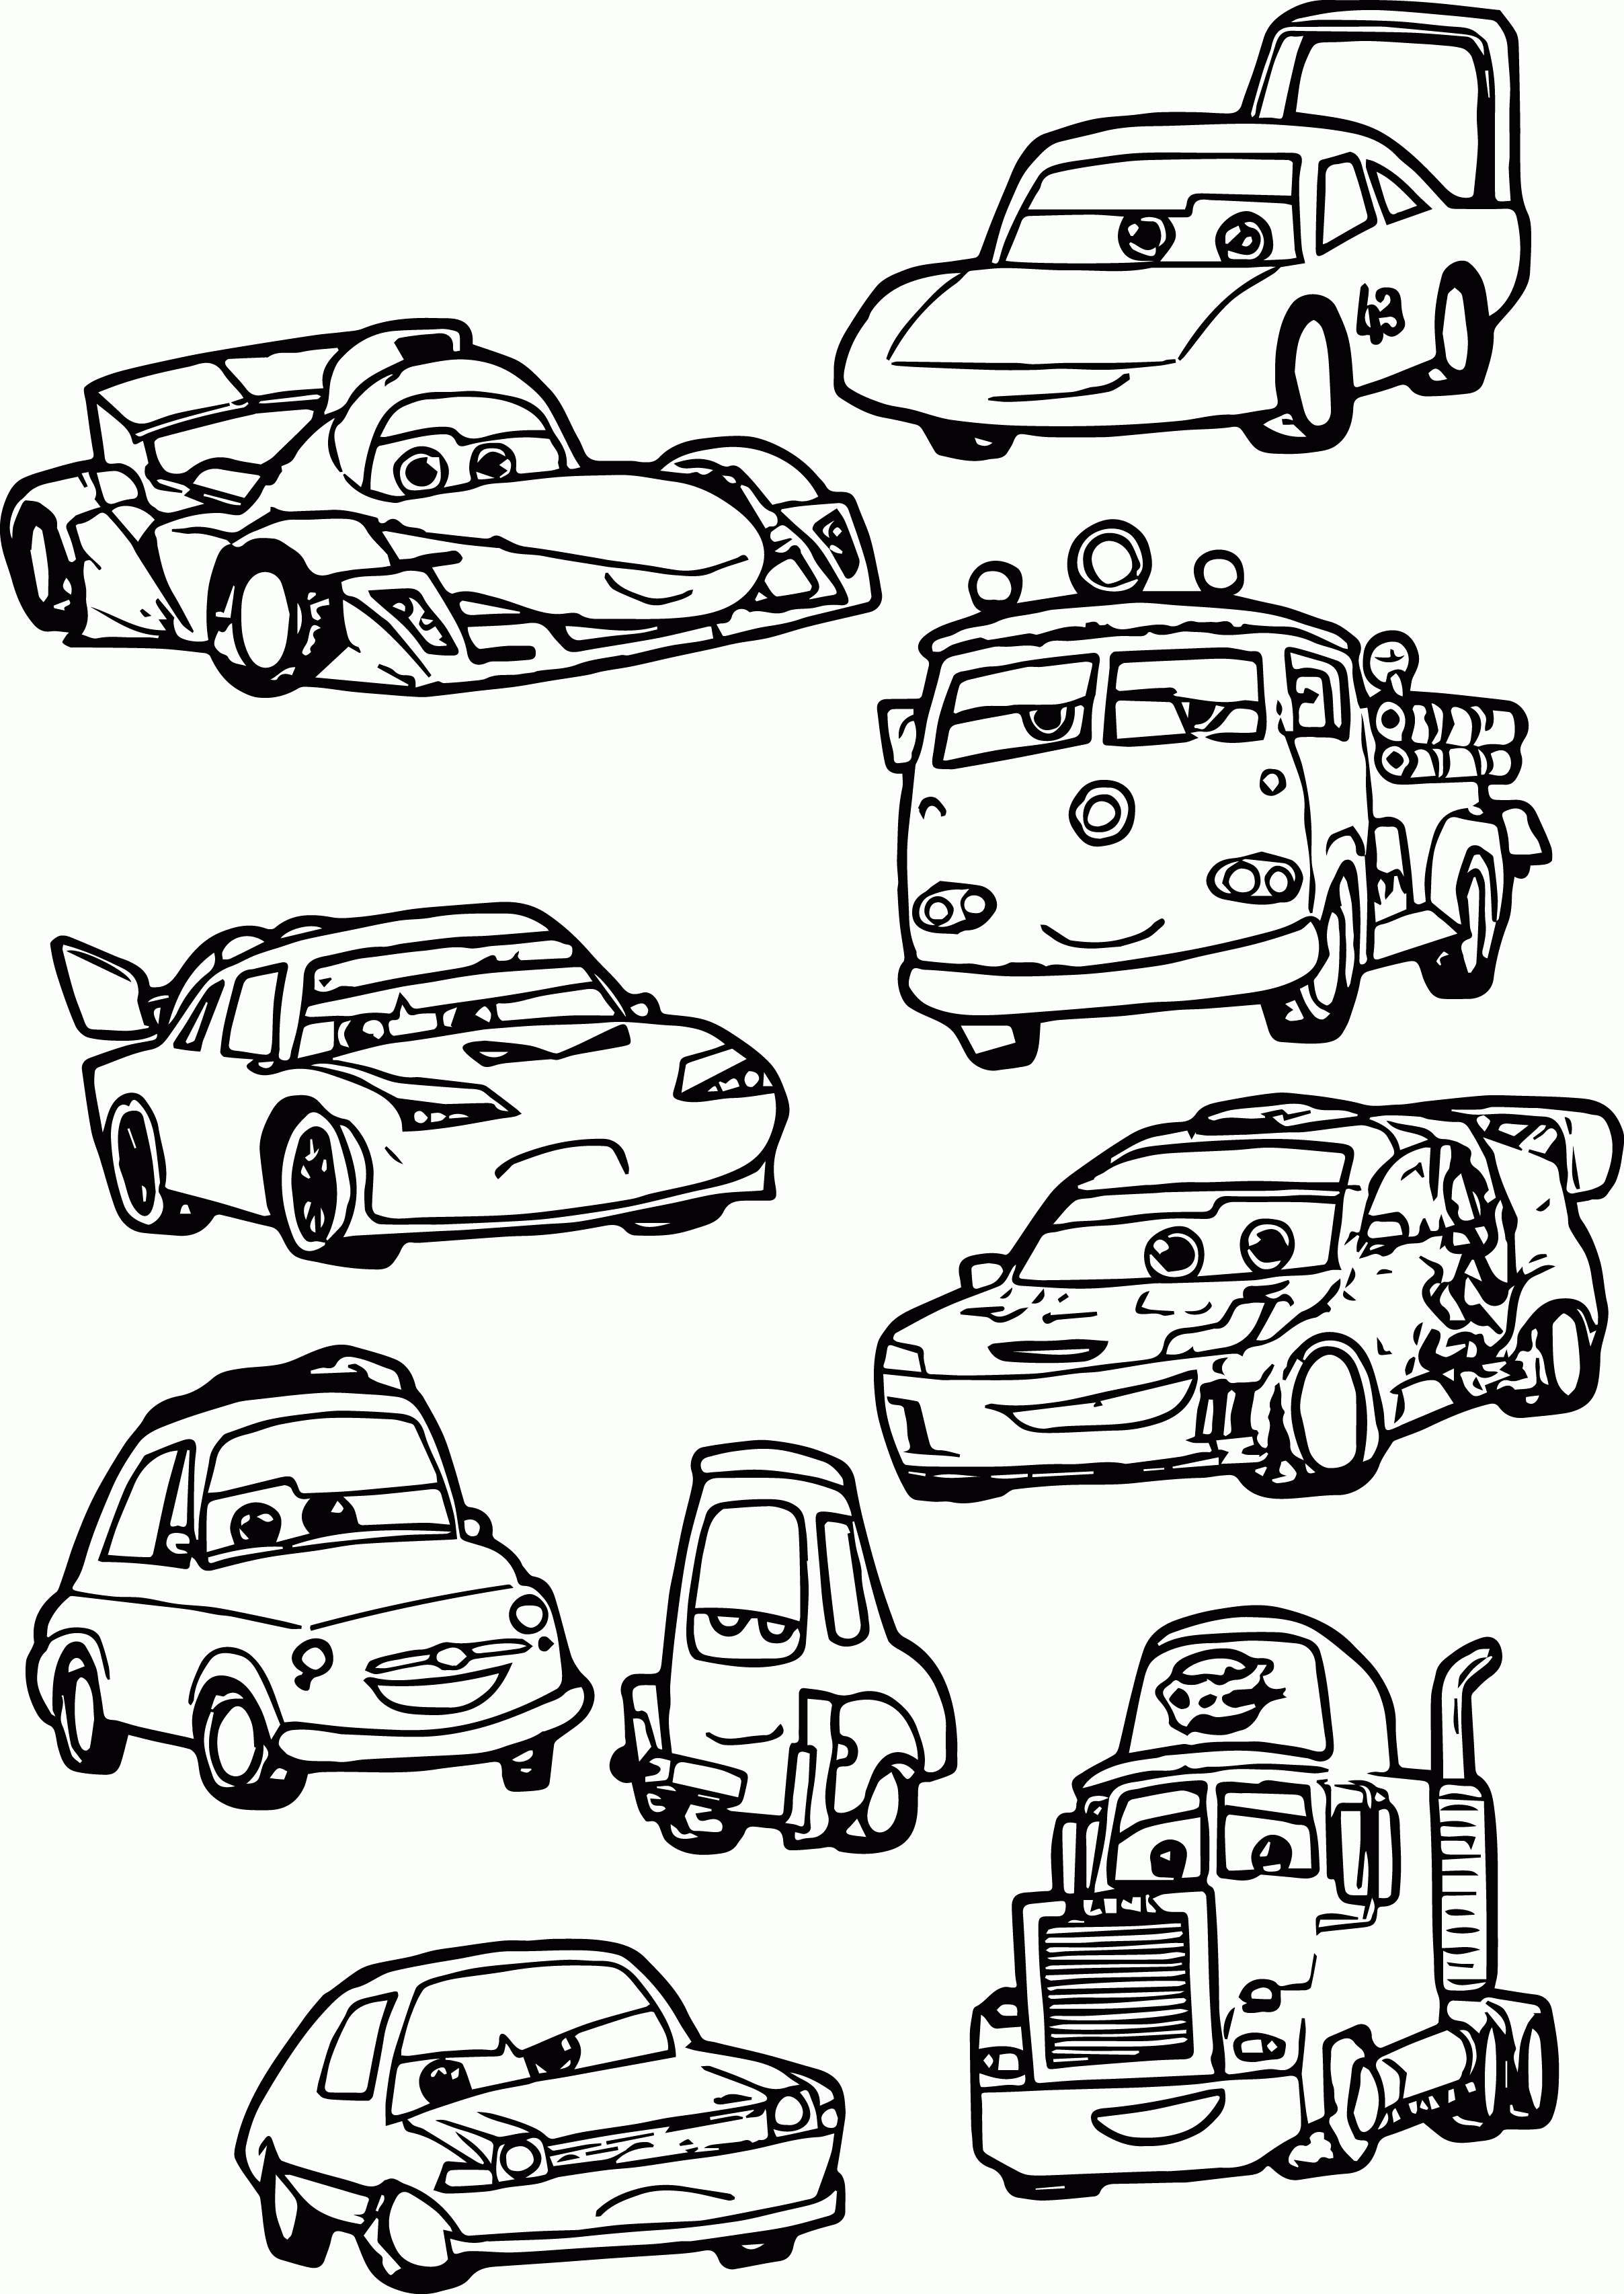 Coloring Pages Cars 2 Characters - Coloring